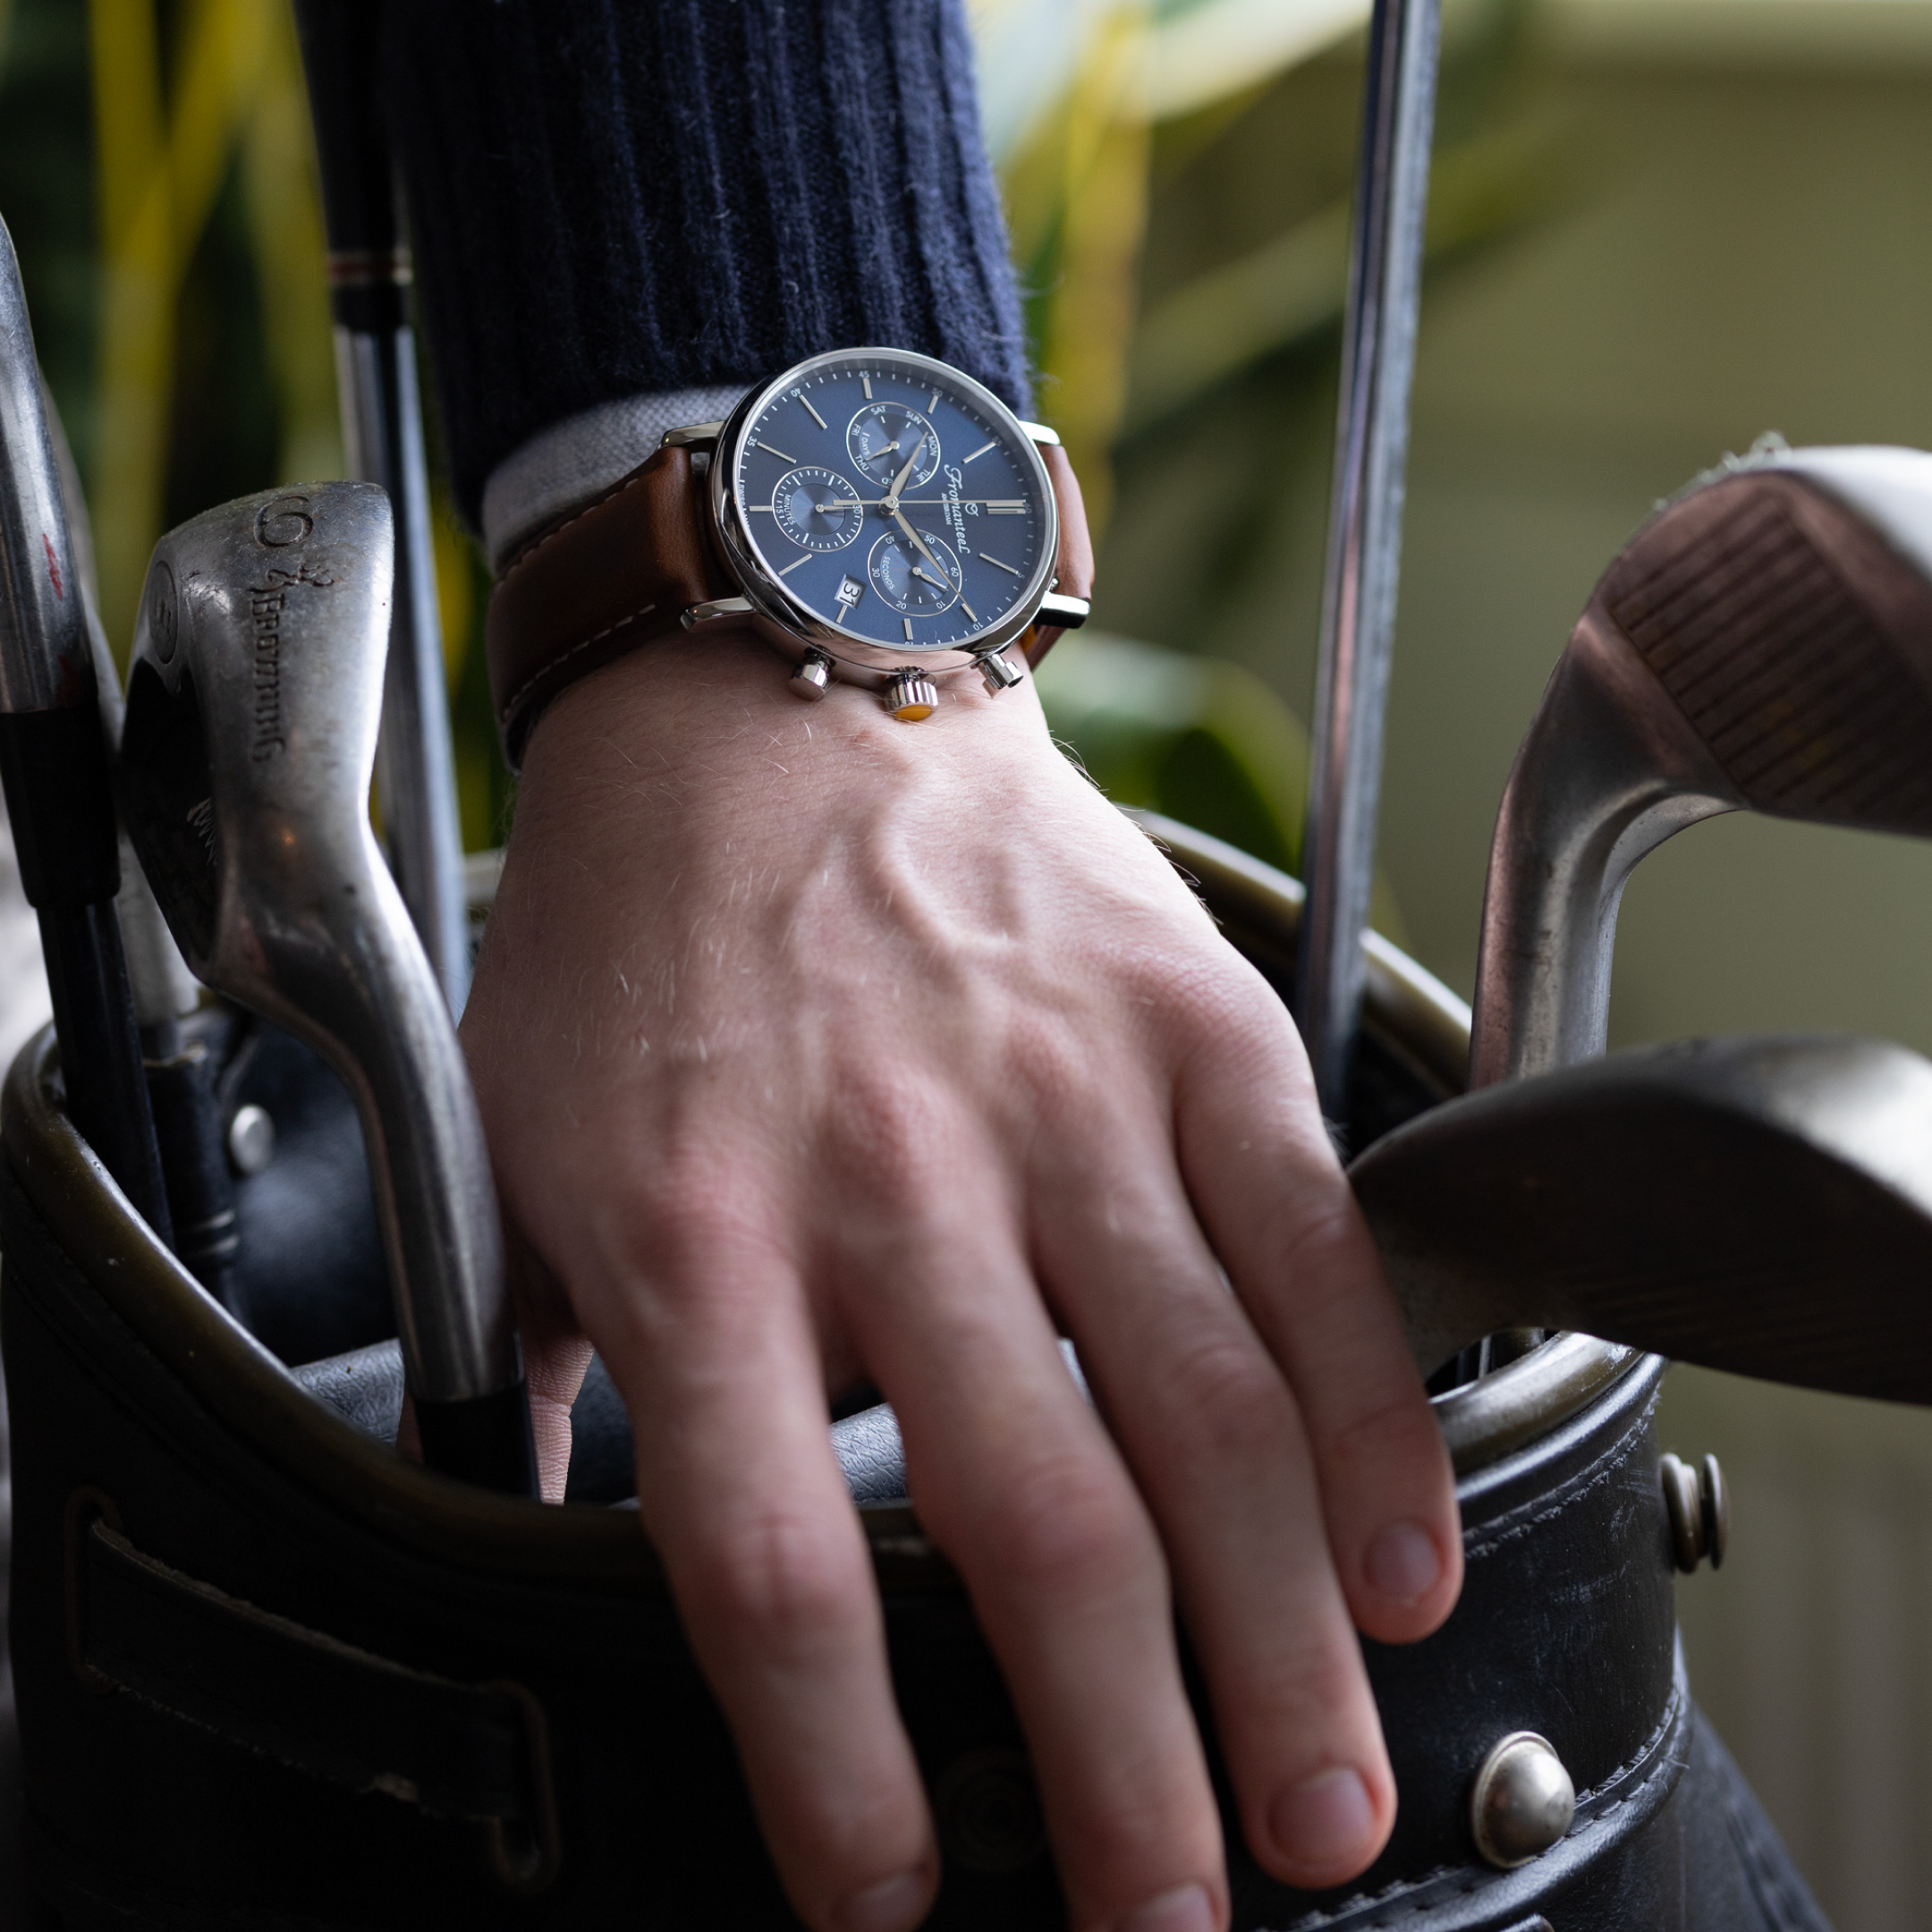 A photo of Fromanteel's Chrono Blue watch with a brown leather strap on a male wrist holding a golf bag.